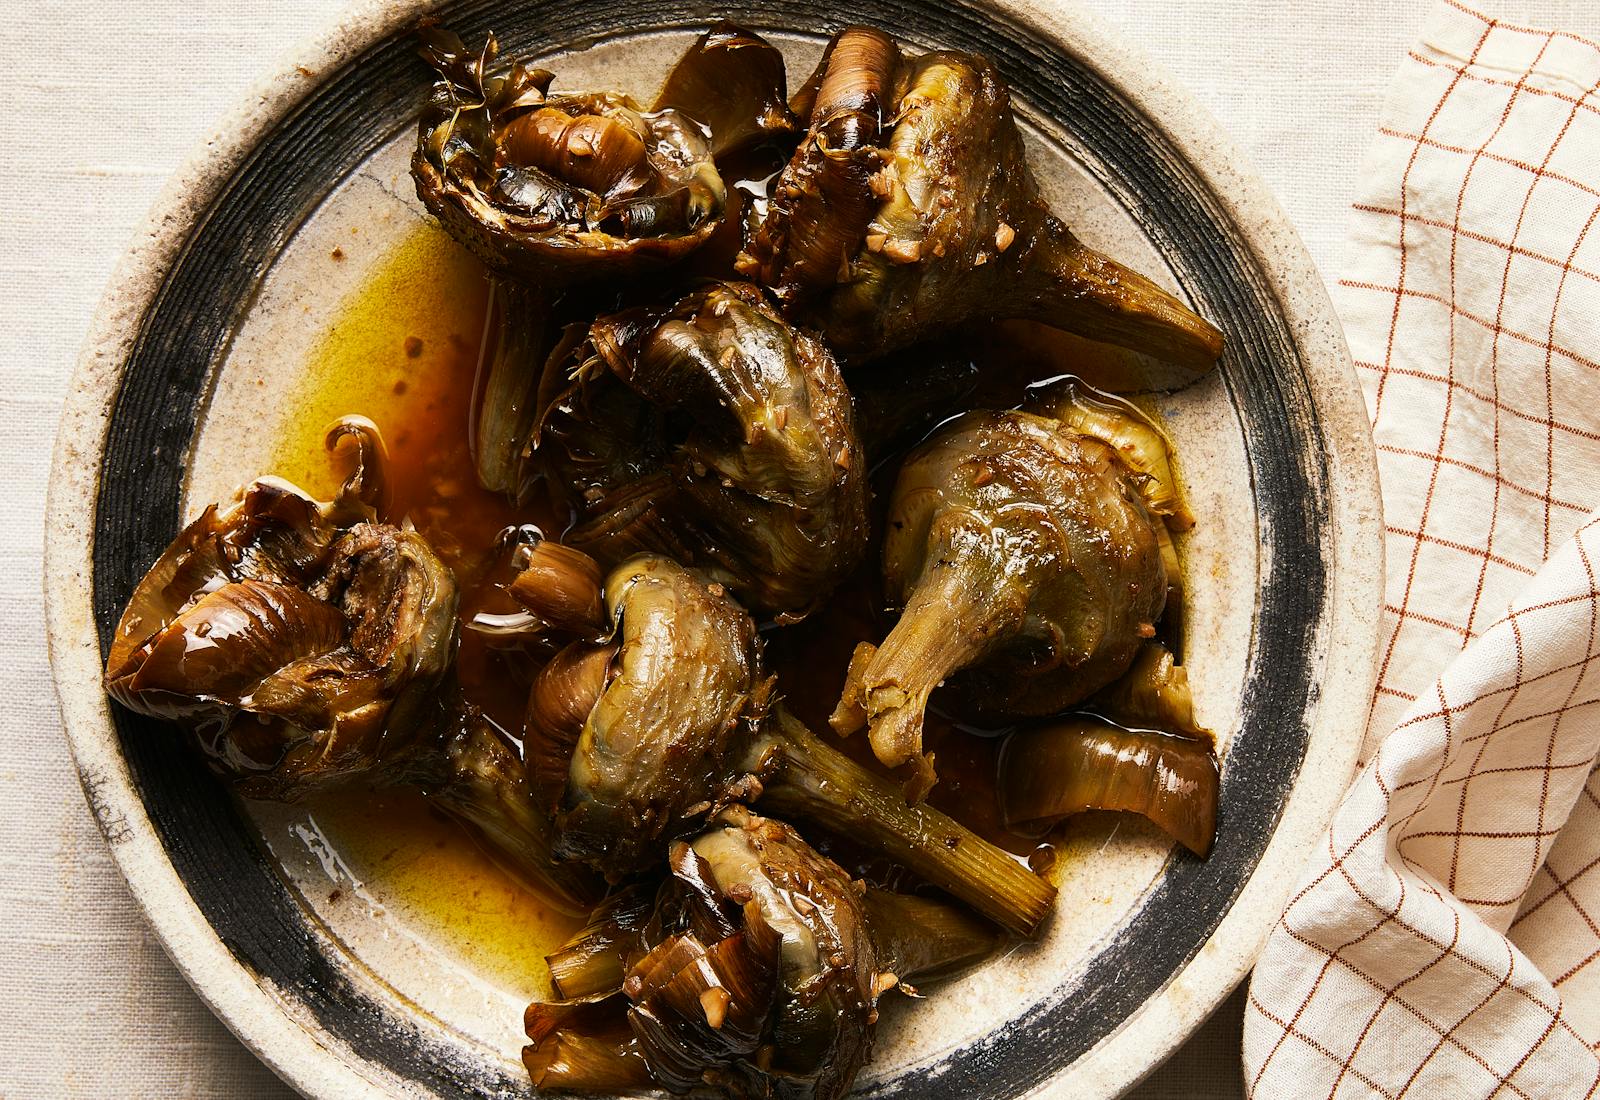 Braised Roman artichokes on beige serving plate with black rim atop white linen tablecloth.